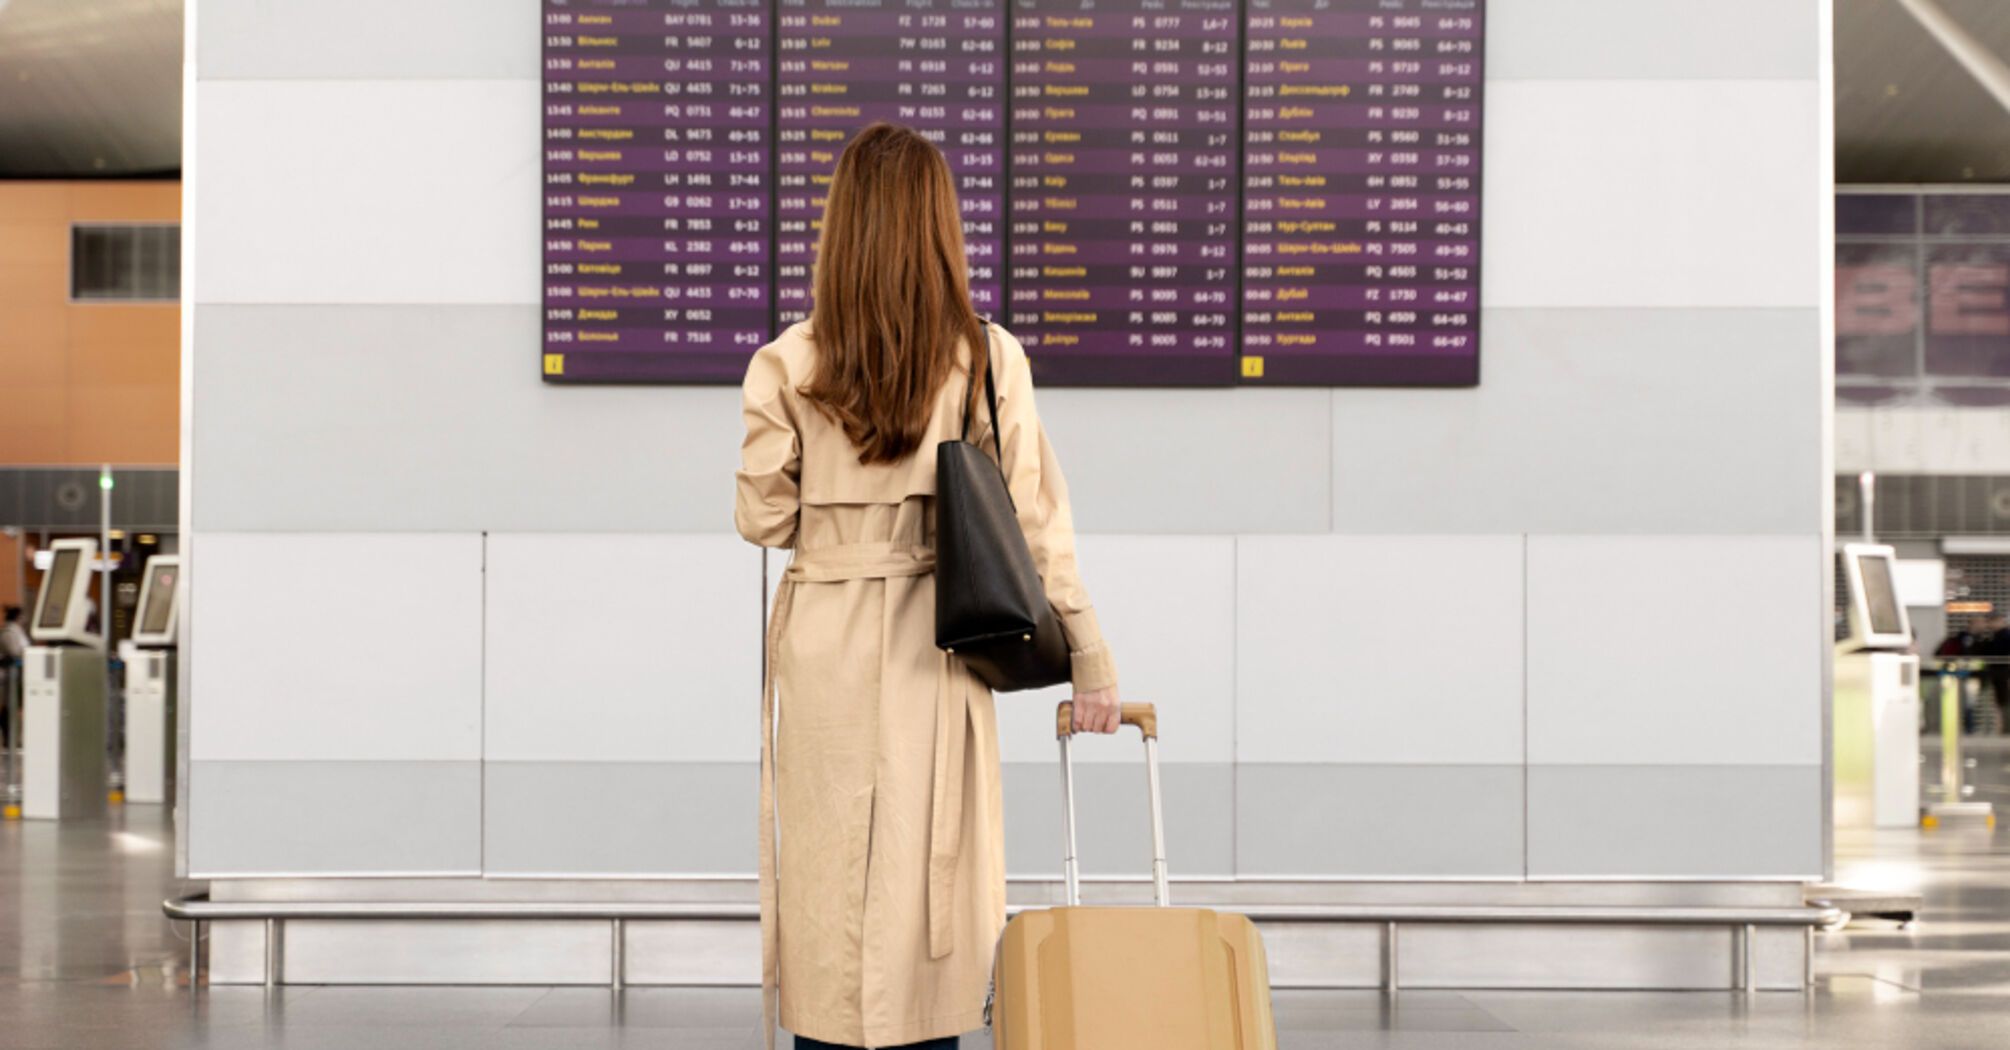 Best airports to connect to in the USA: what to see while waiting for your flight